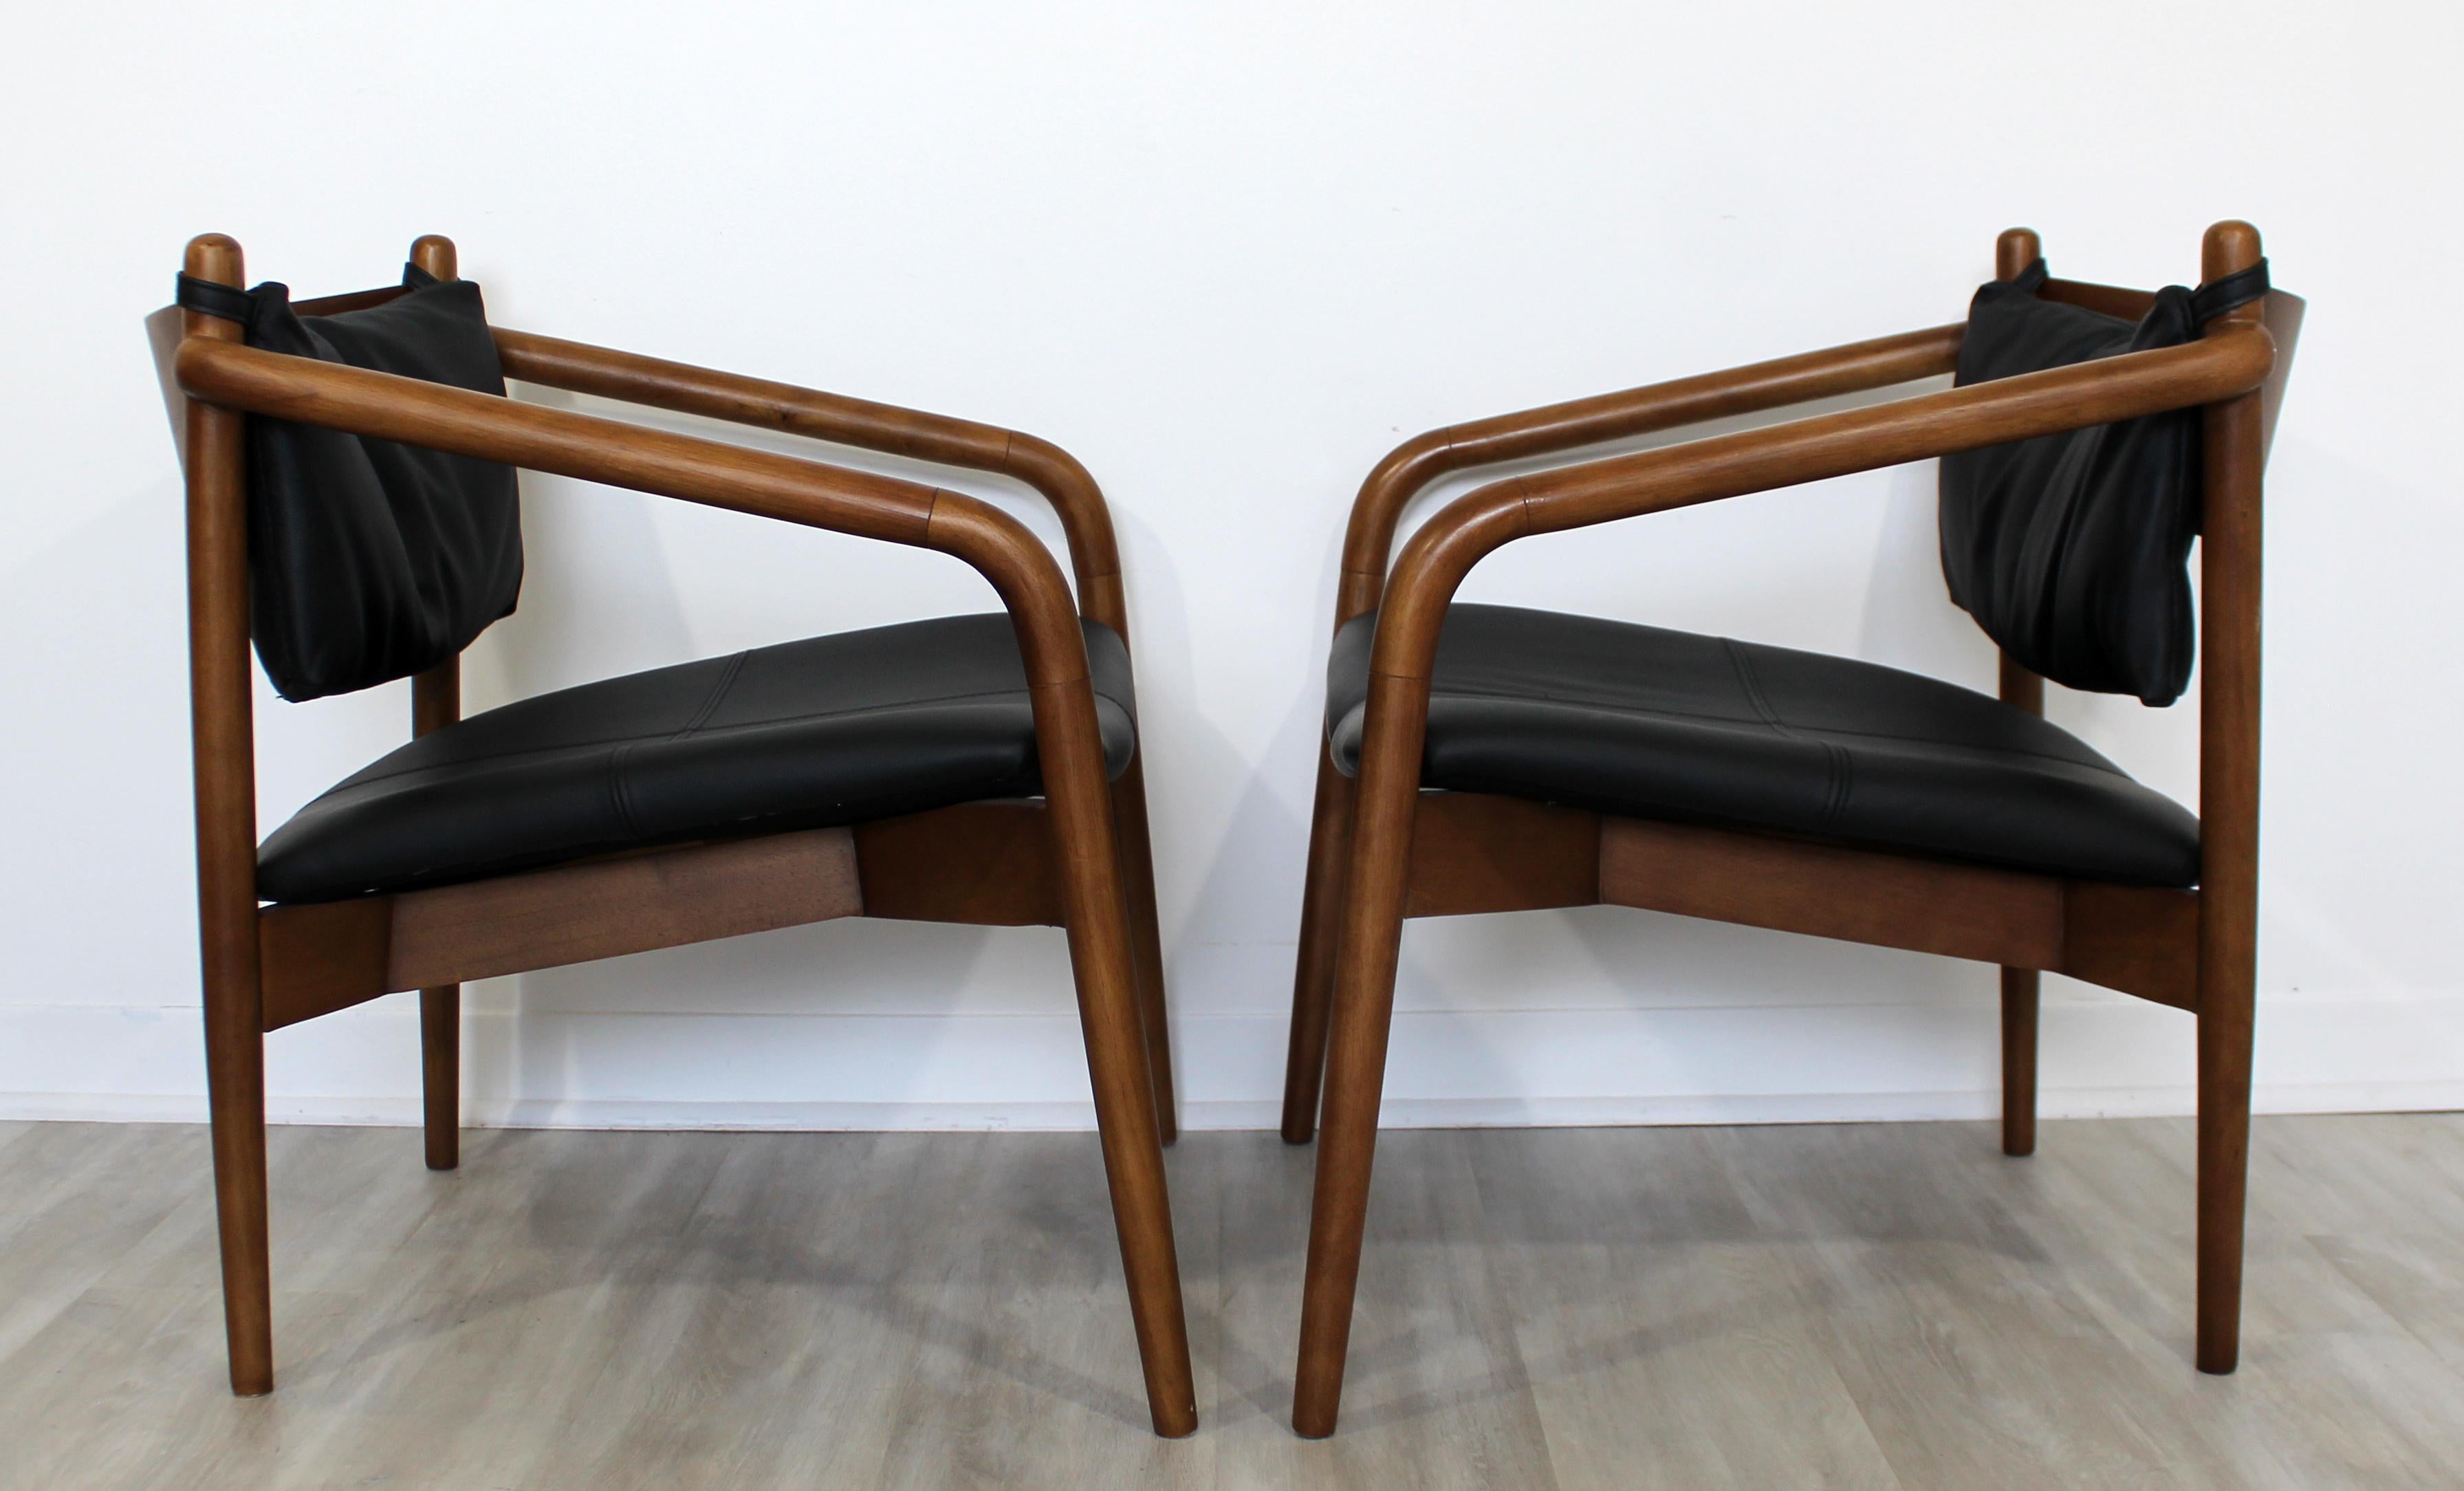 For your consideration is a simply lovely pair of curved or bent wood armchairs, circa 1970s. In very good vintage condition. The dimensions are 25